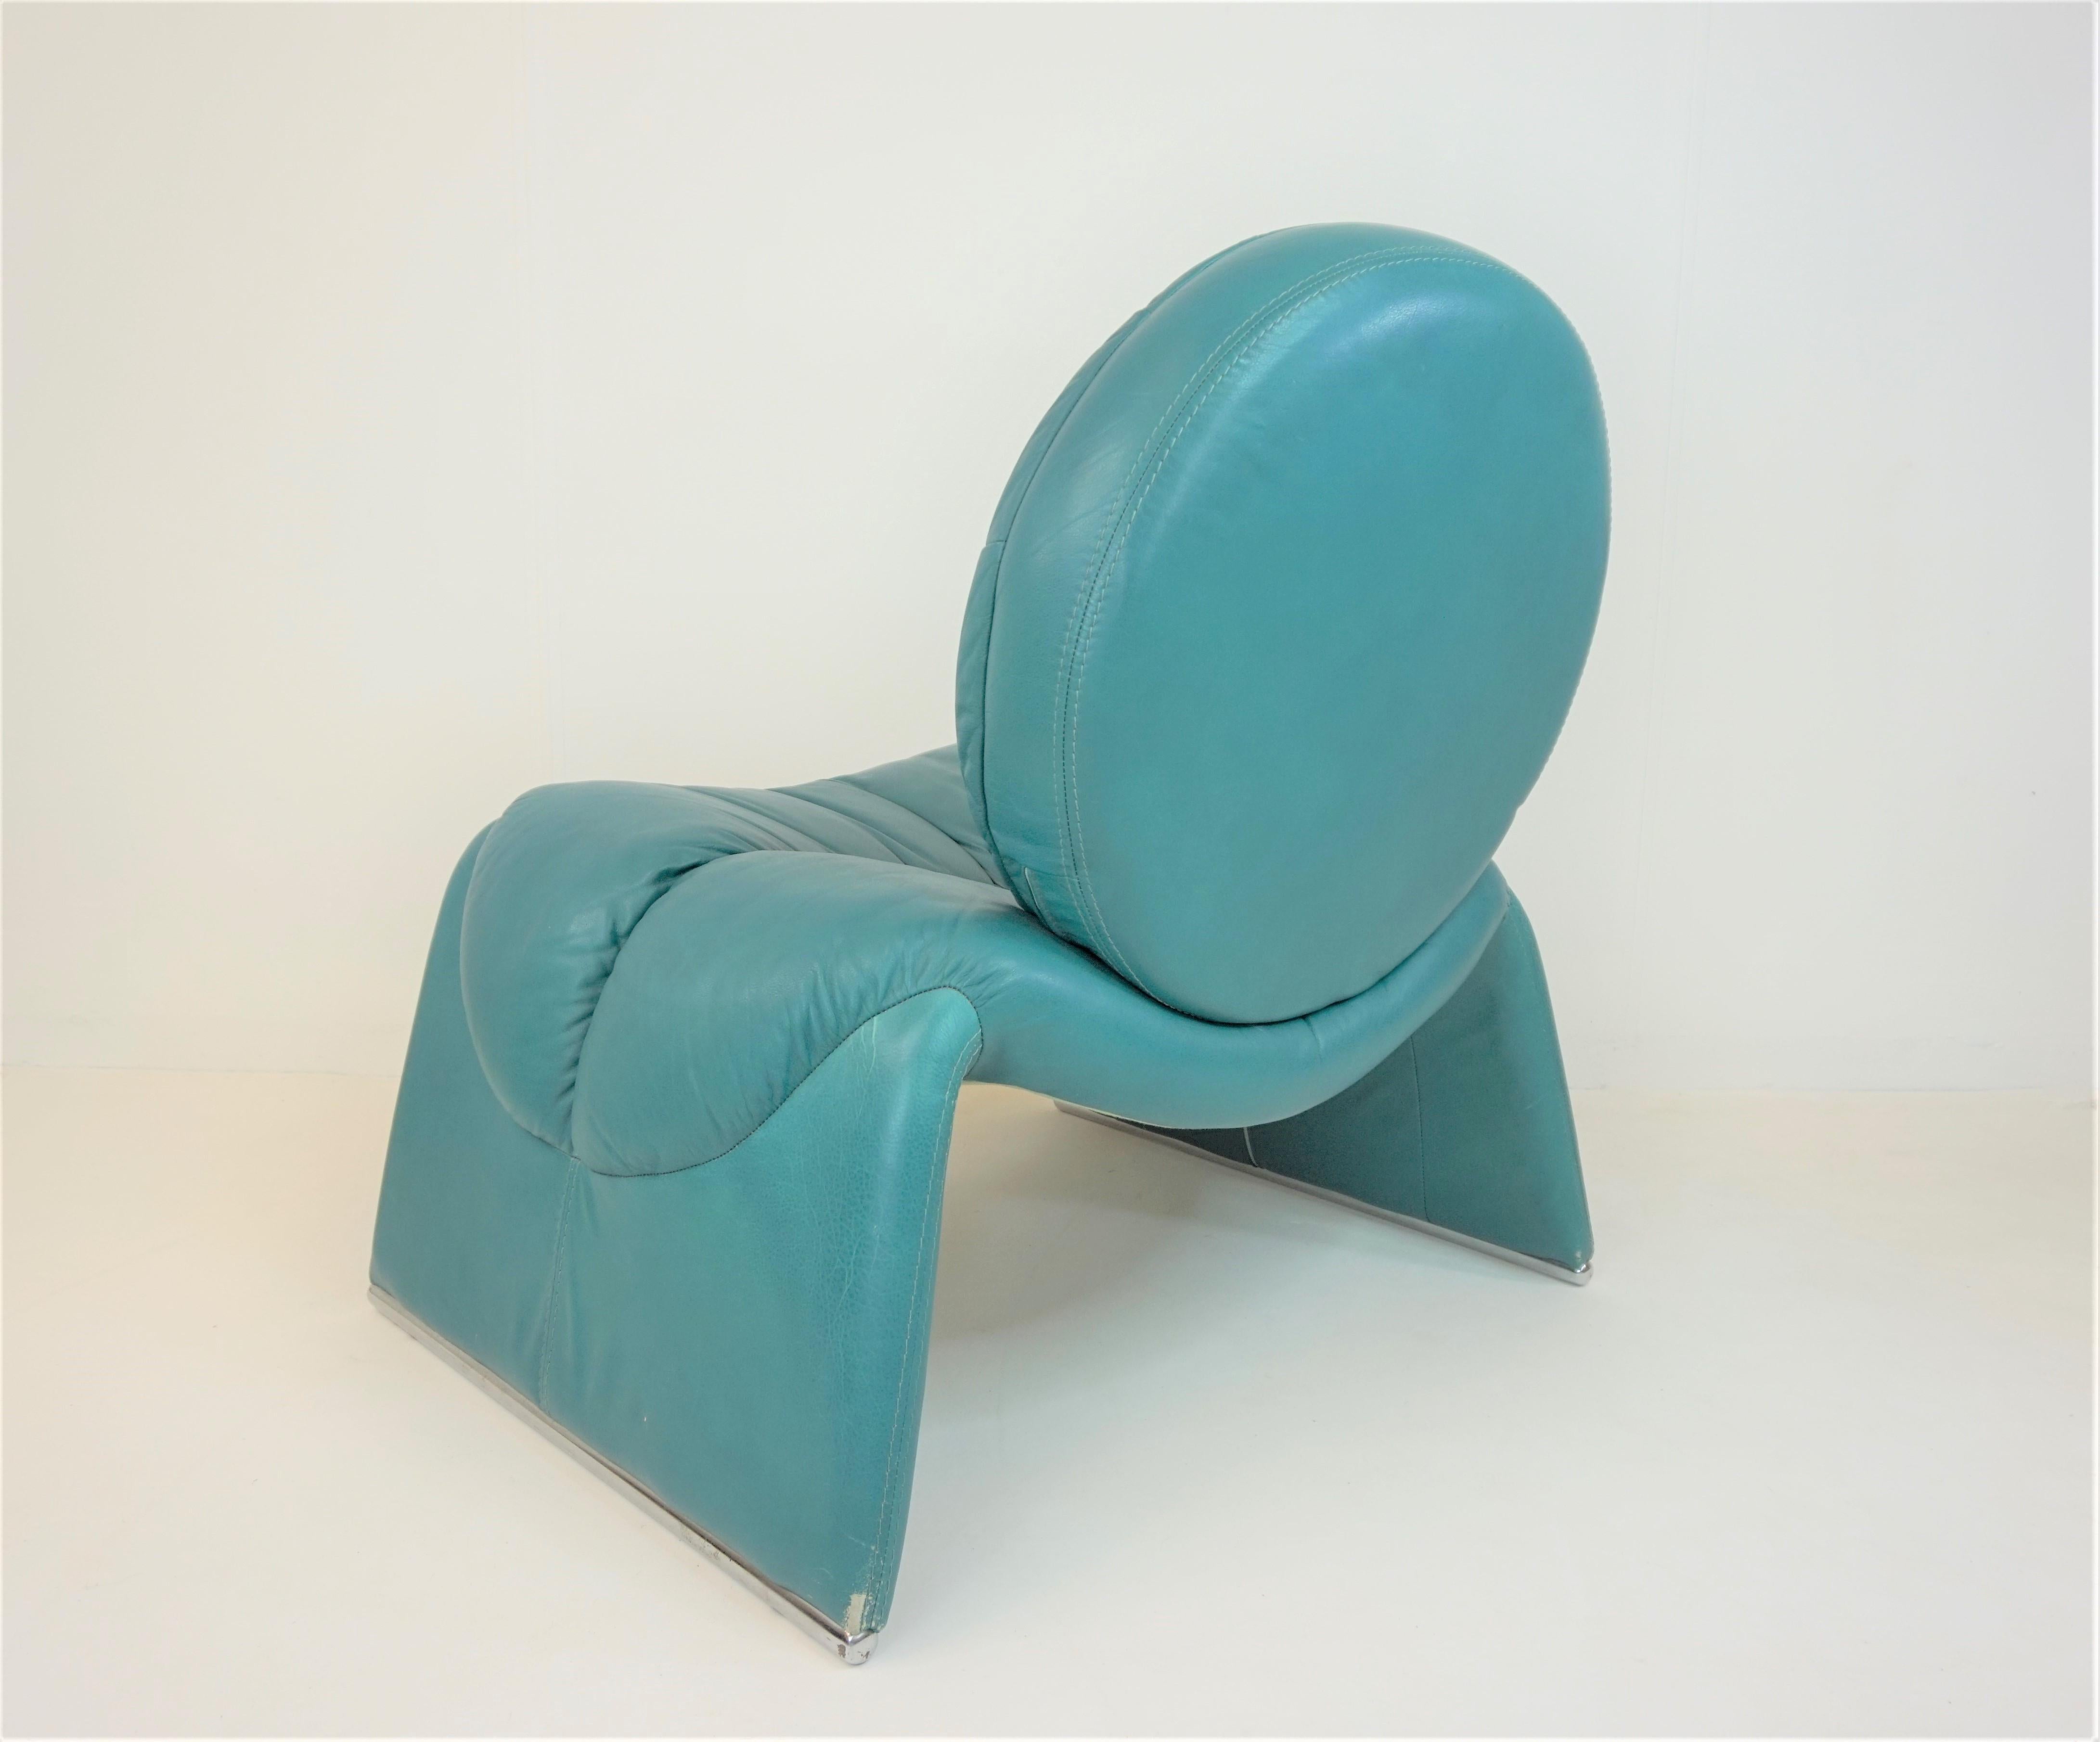 This C35 in a turquoise leather tone is in very good condition. The soft leather only shows slight signs of wear on the lower corners of the legs. The construction is solid, the seating comfort impeccable. The Calypso has become a popular design